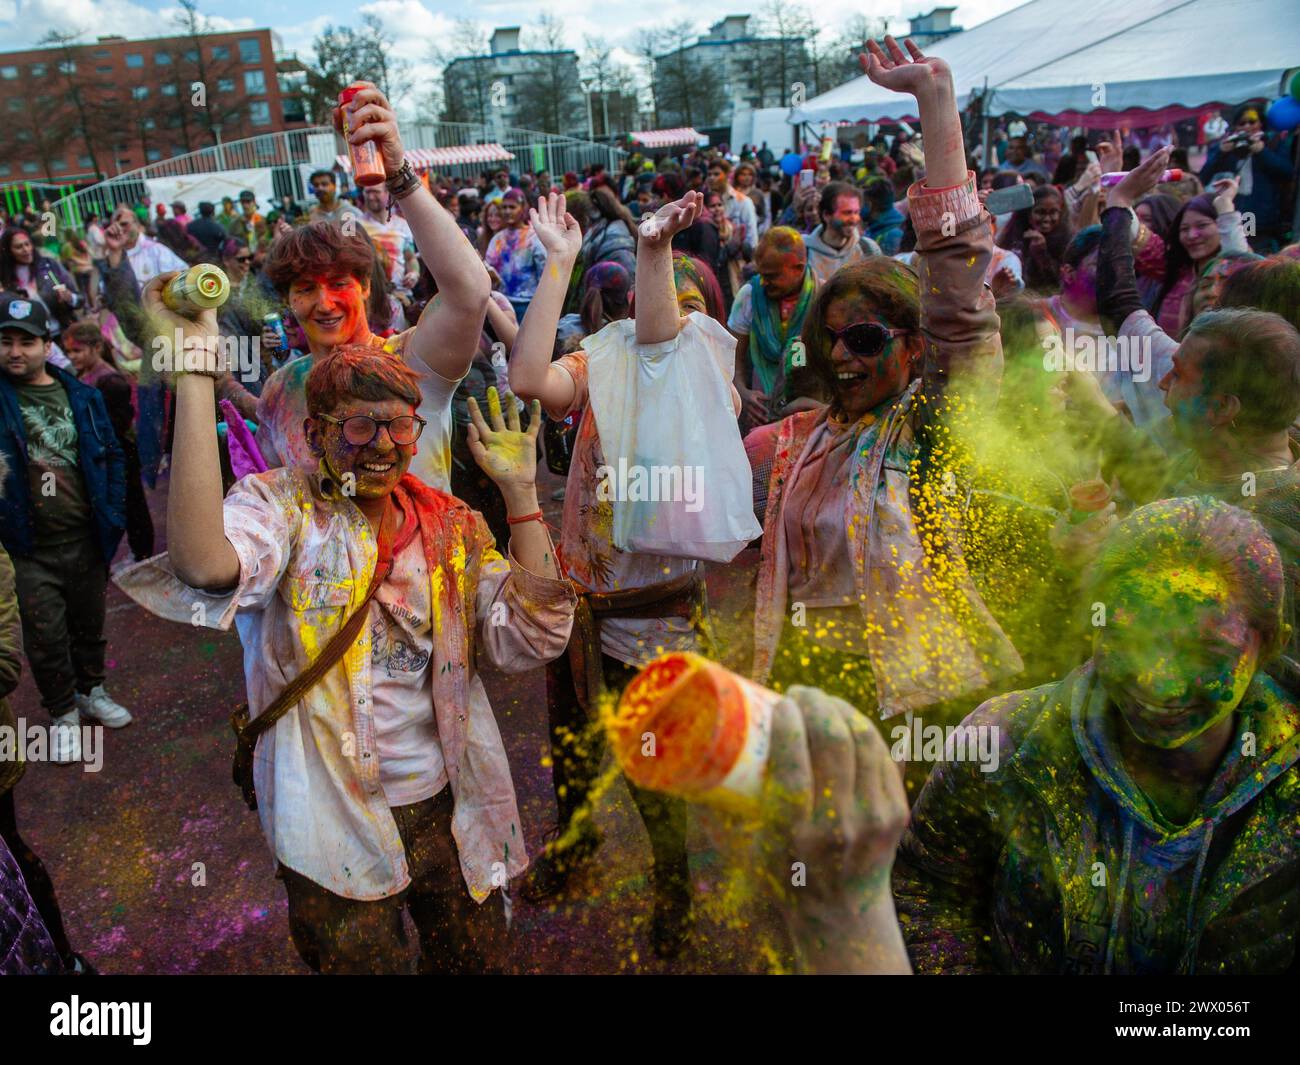 Millions of people worldwide celebrate the annual Holi Hangámá Festival, also known as the Festival of Colours, which means celebrating the arrival of Spring. In The Hague, where the largest Indian population in Europe can be found, a big celebration occurred in the multicultural Transvaal neighborhood, where participants threw brightly colored powder on themselves and at each other. People celebrated this event by walking around the neighborhood singing and dancing in a colorful procession. (Photo by /Sipa USA) Credit: Sipa USA/Alamy Live News Stock Photo